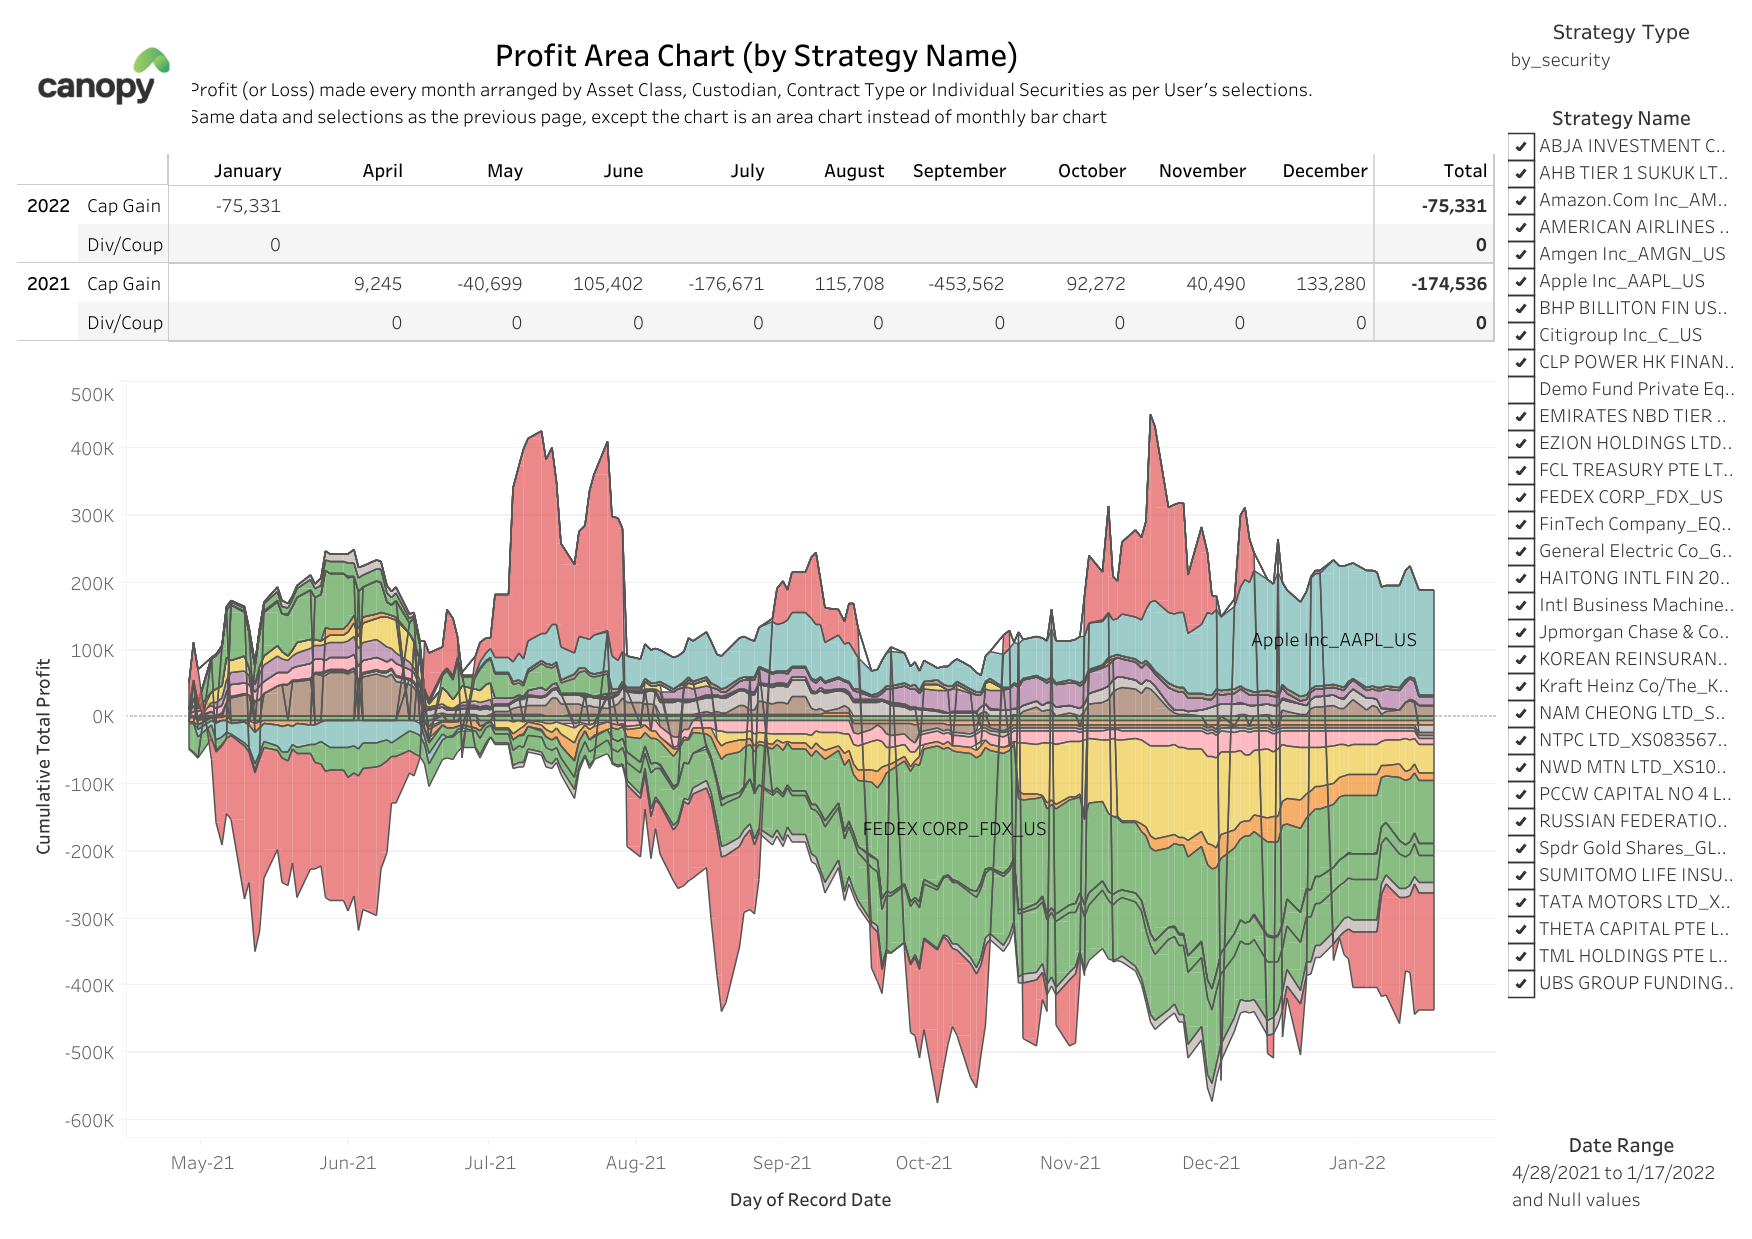 Profit/Loss on the account can be combined and visualized in any way desired